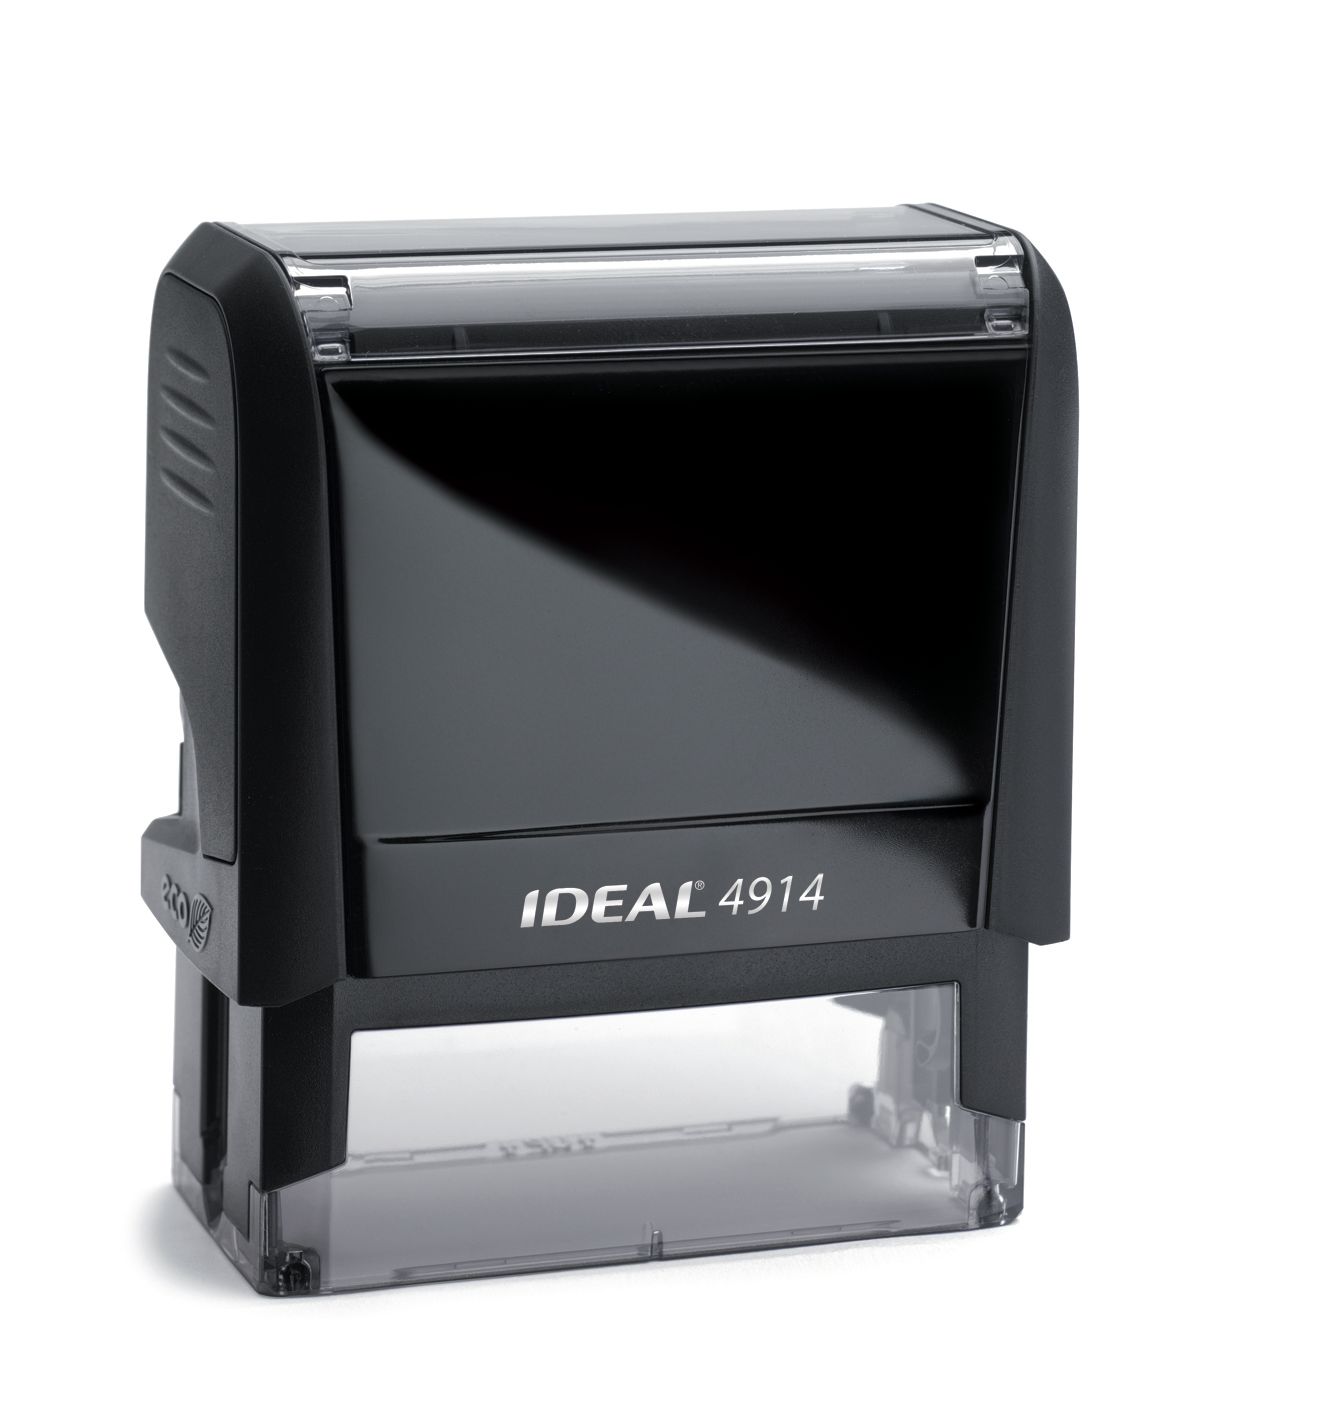 Ideal 4914 Self Inking Stamp